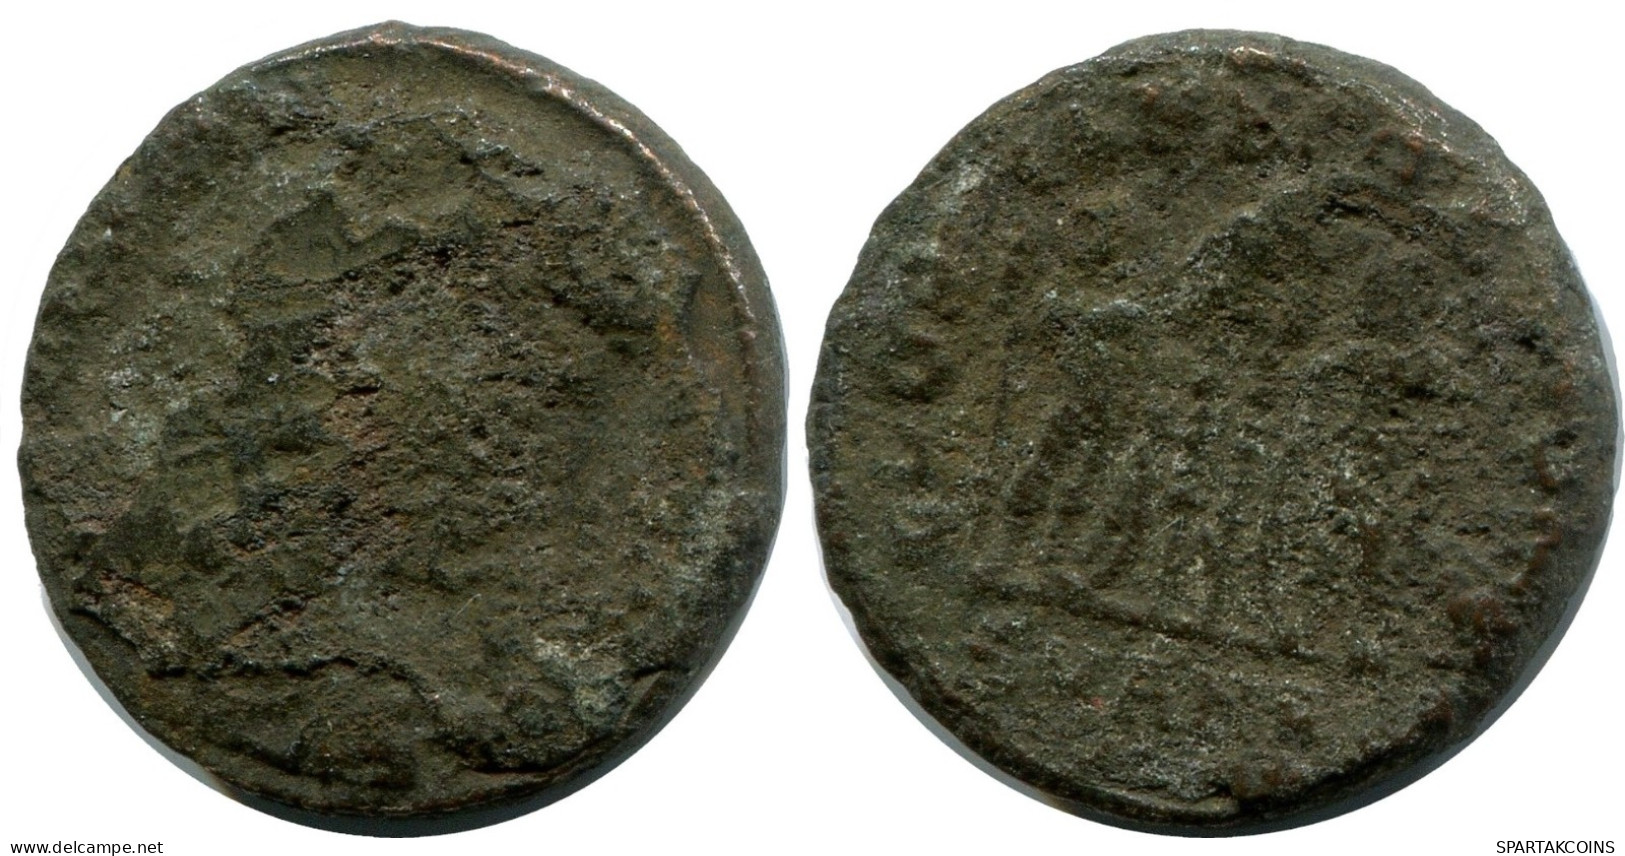 CONSTANTINE I MINTED IN ANTIOCH FOUND IN IHNASYAH HOARD EGYPT #ANC10628.14.U.A - El Impero Christiano (307 / 363)